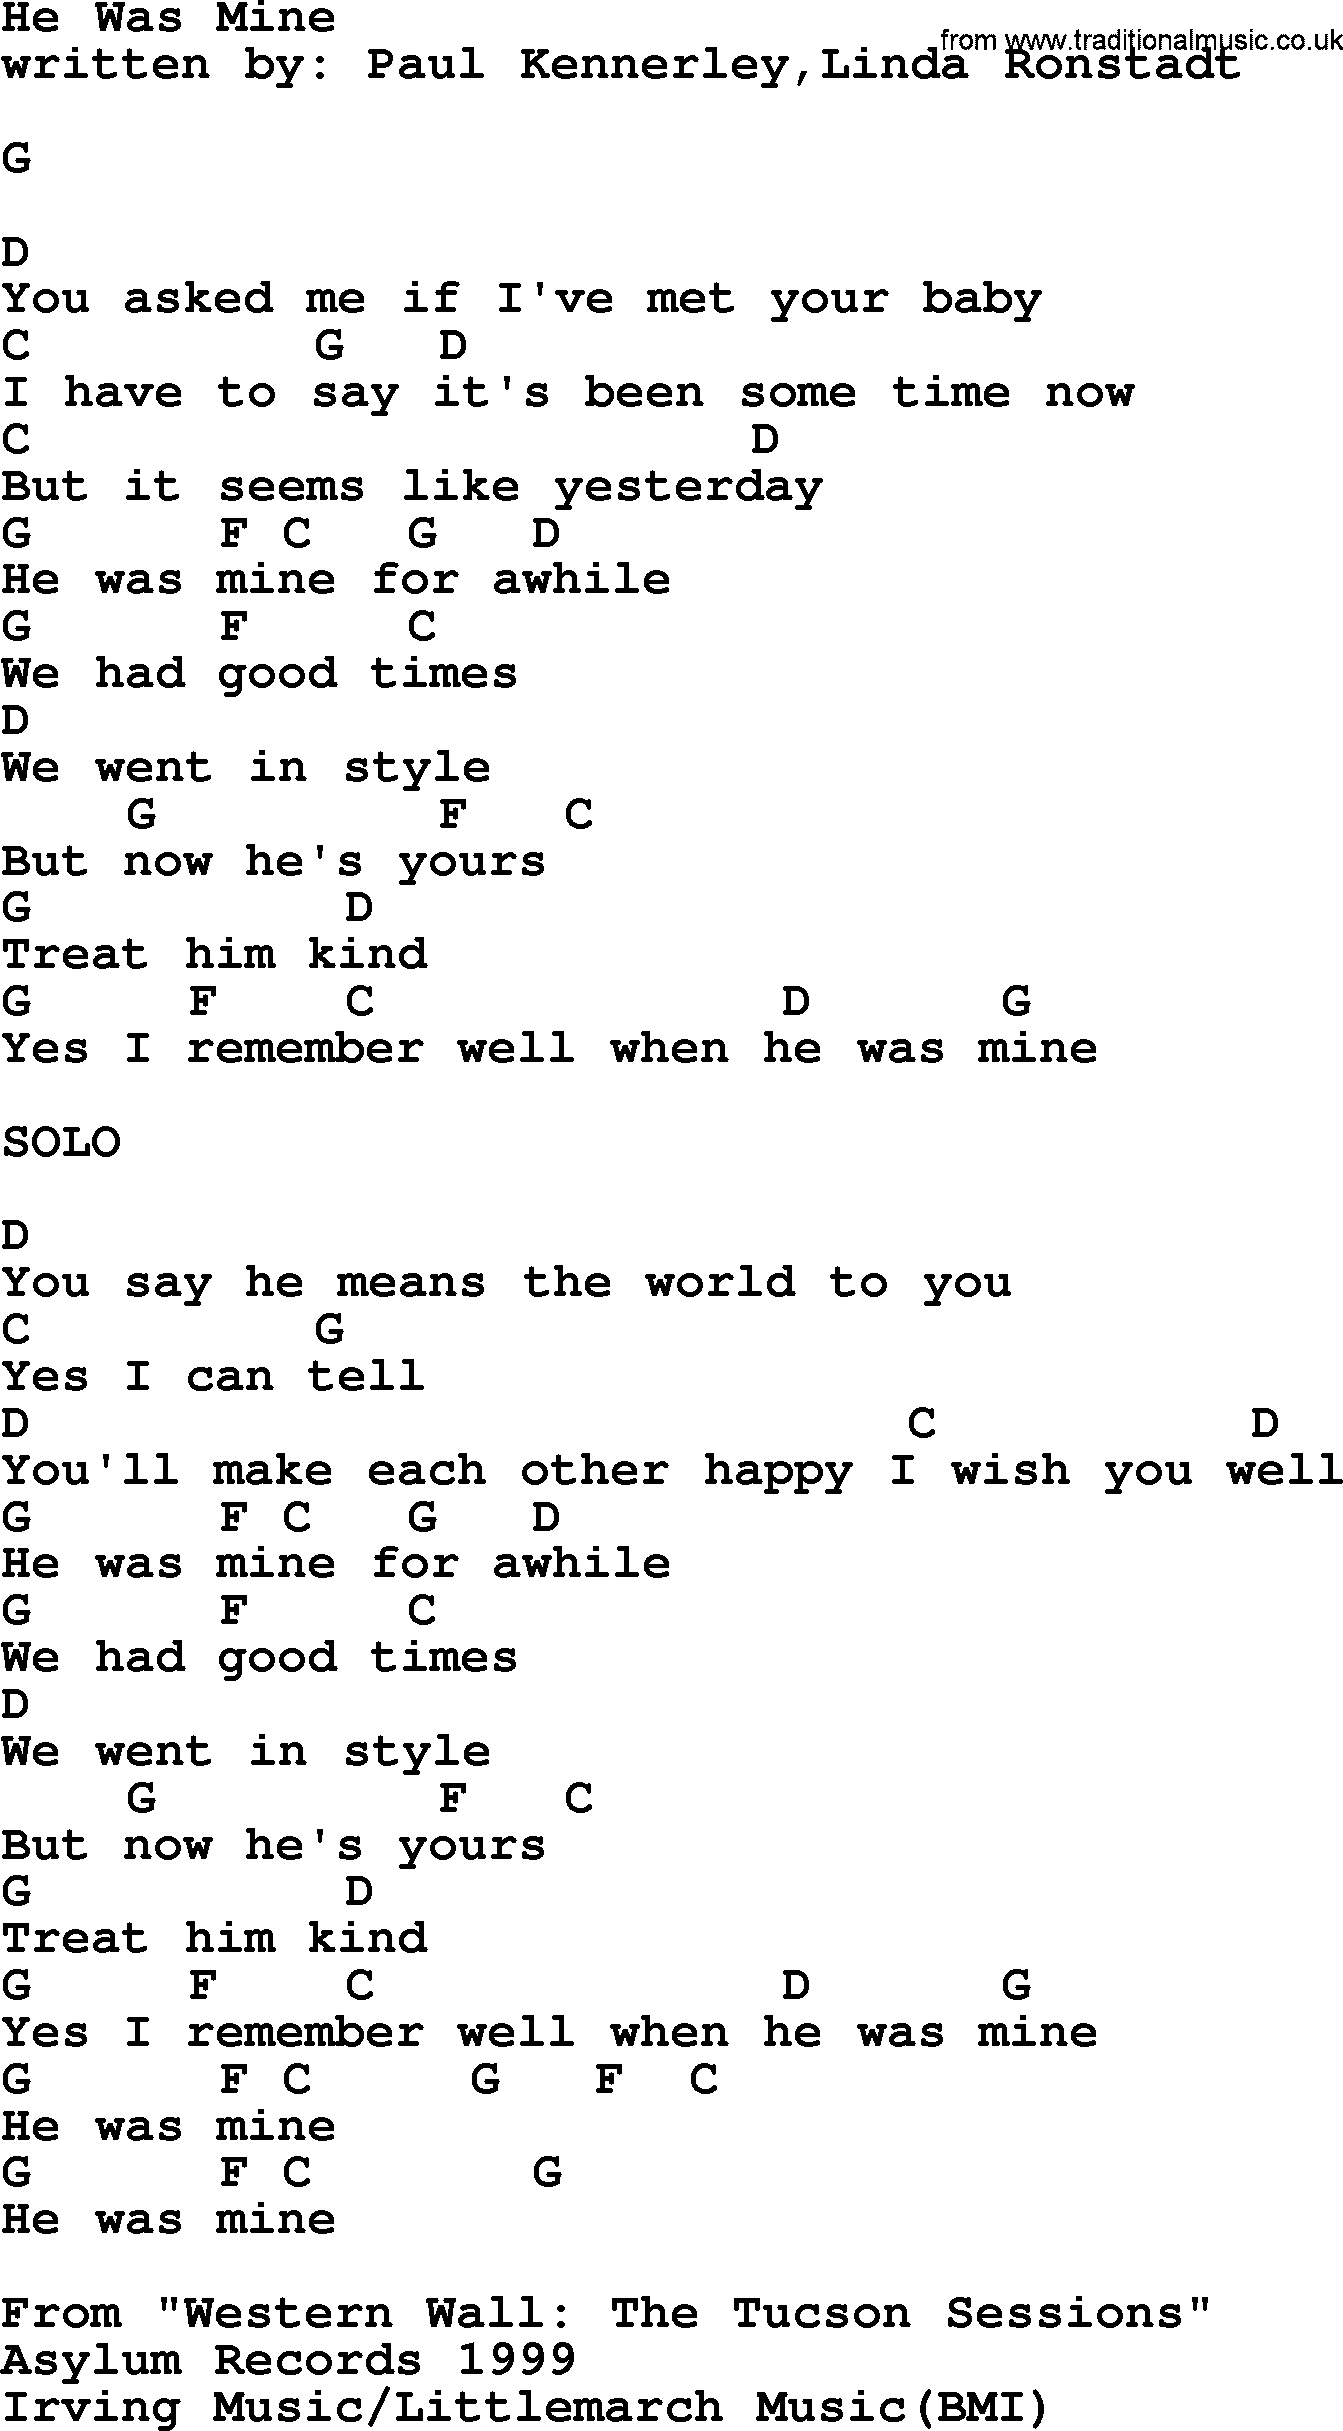 Emmylou Harris song: He Was Mine lyrics and chords